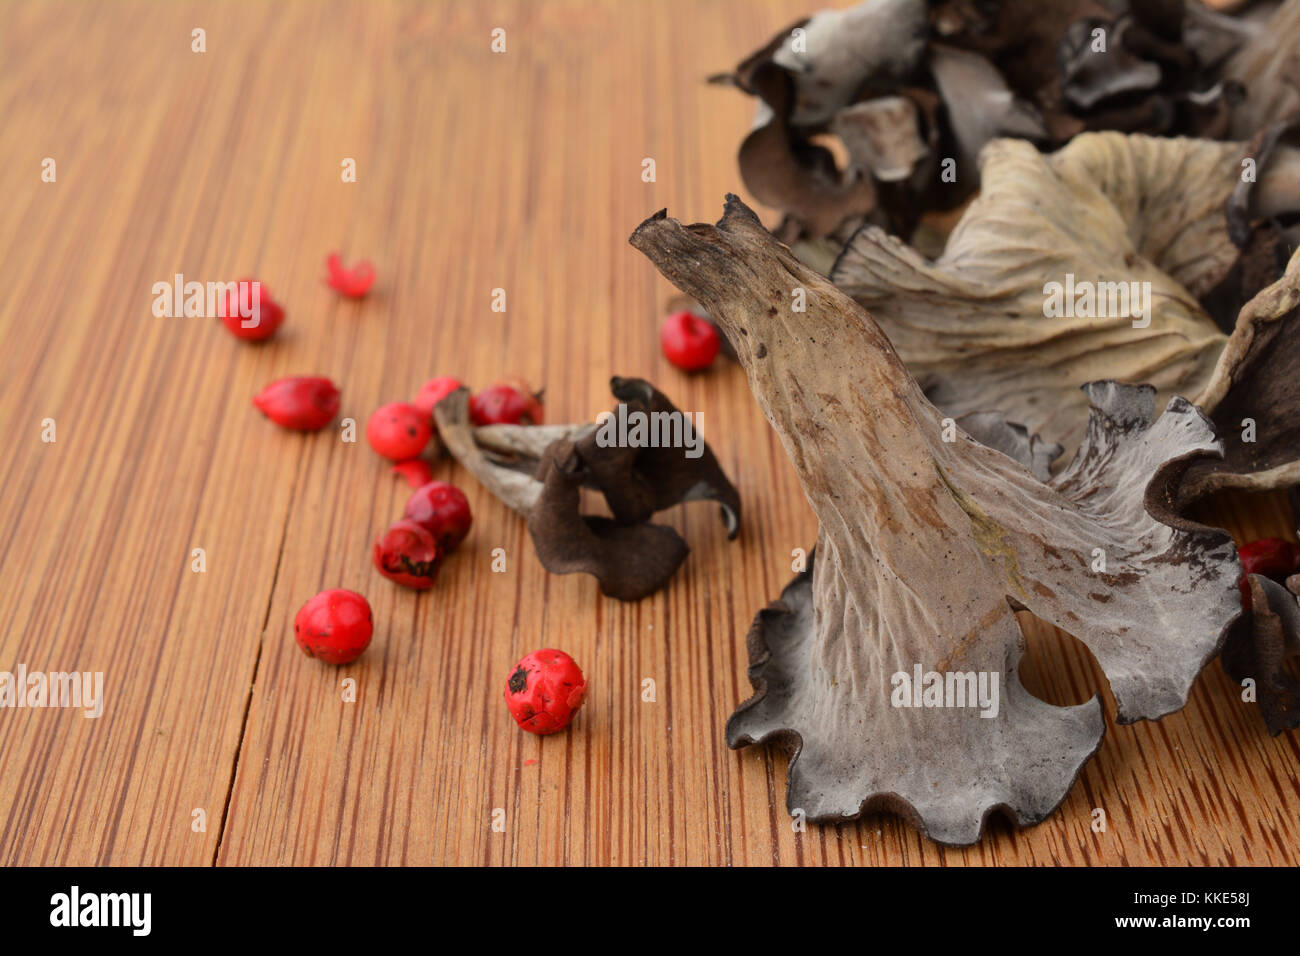 One Horn of Plenty  or Craterellus cornucopioides mushroom on wooden chopping board in foreground with red pepper and dried mushrooms in background Stock Photo